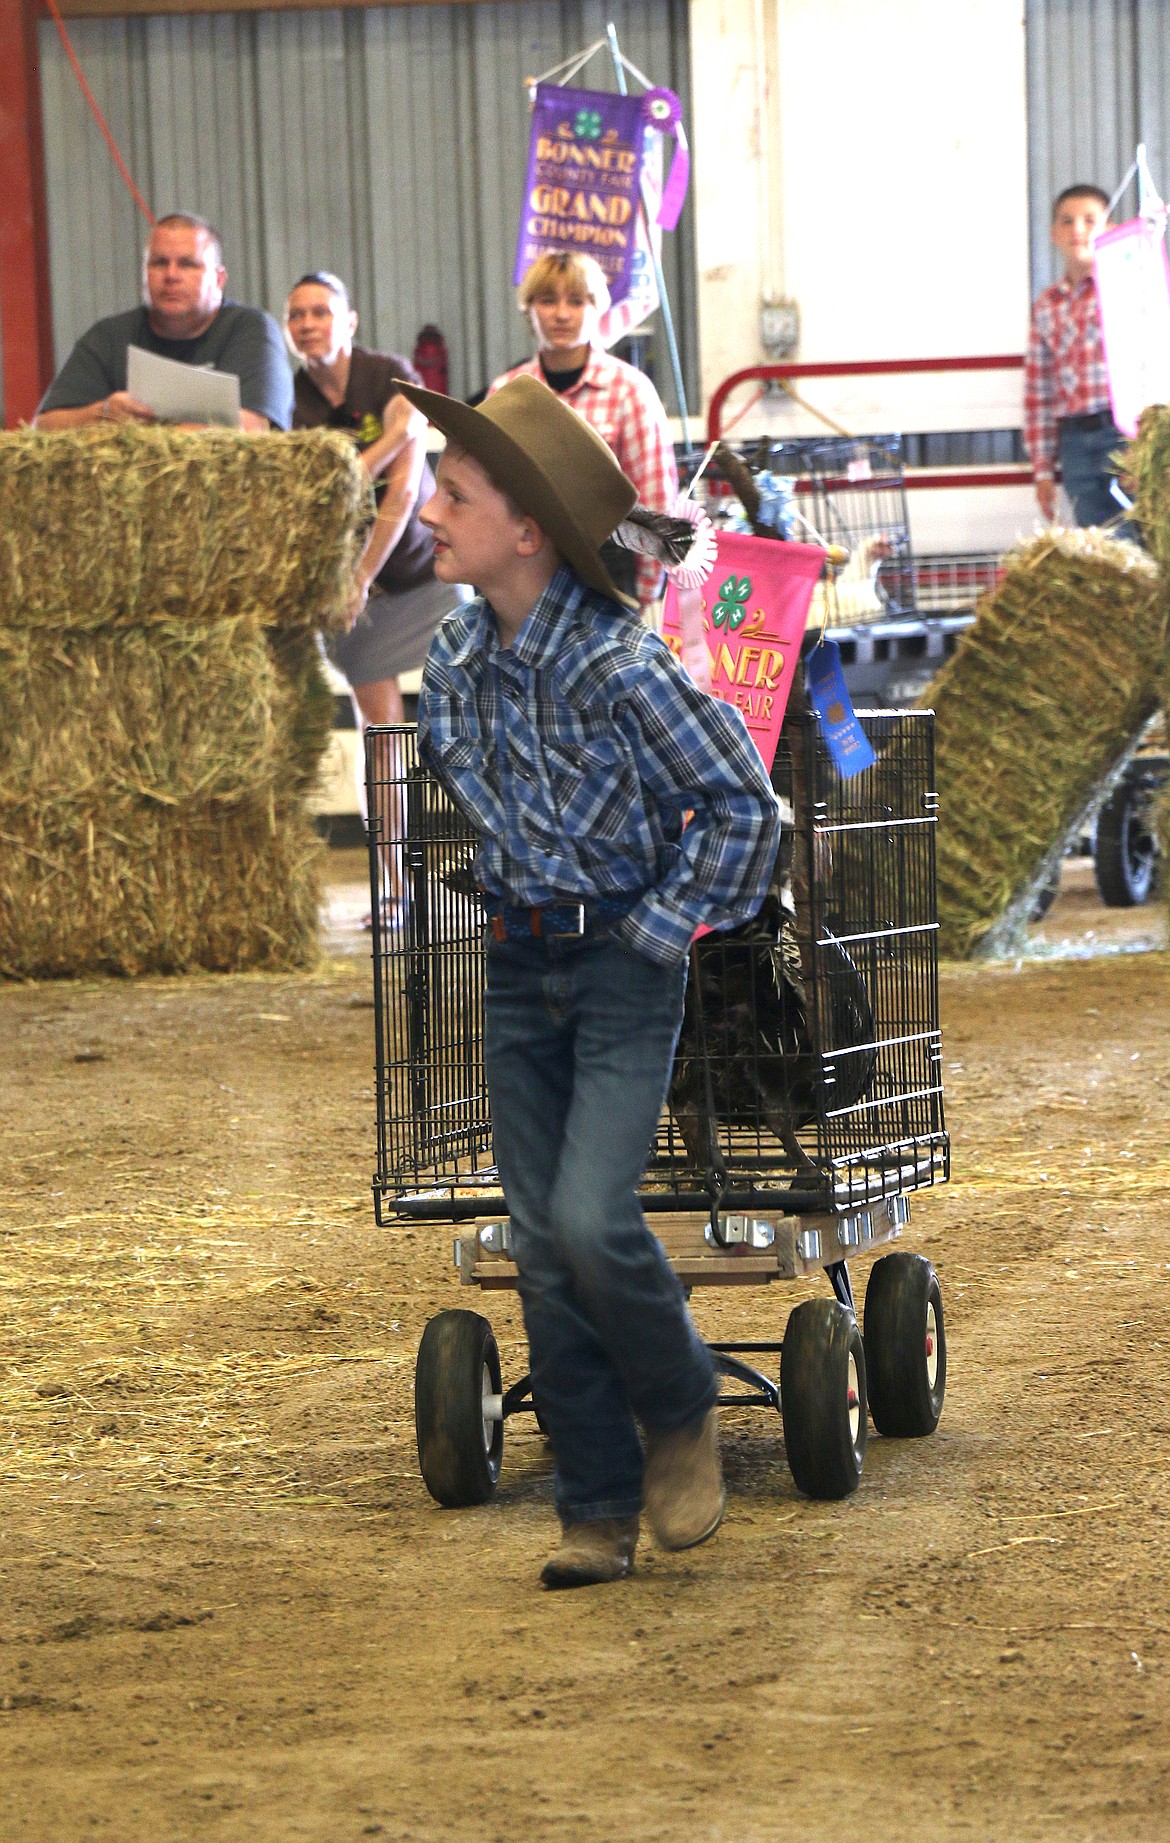 A young 4-H'er shows their animals at the fair.